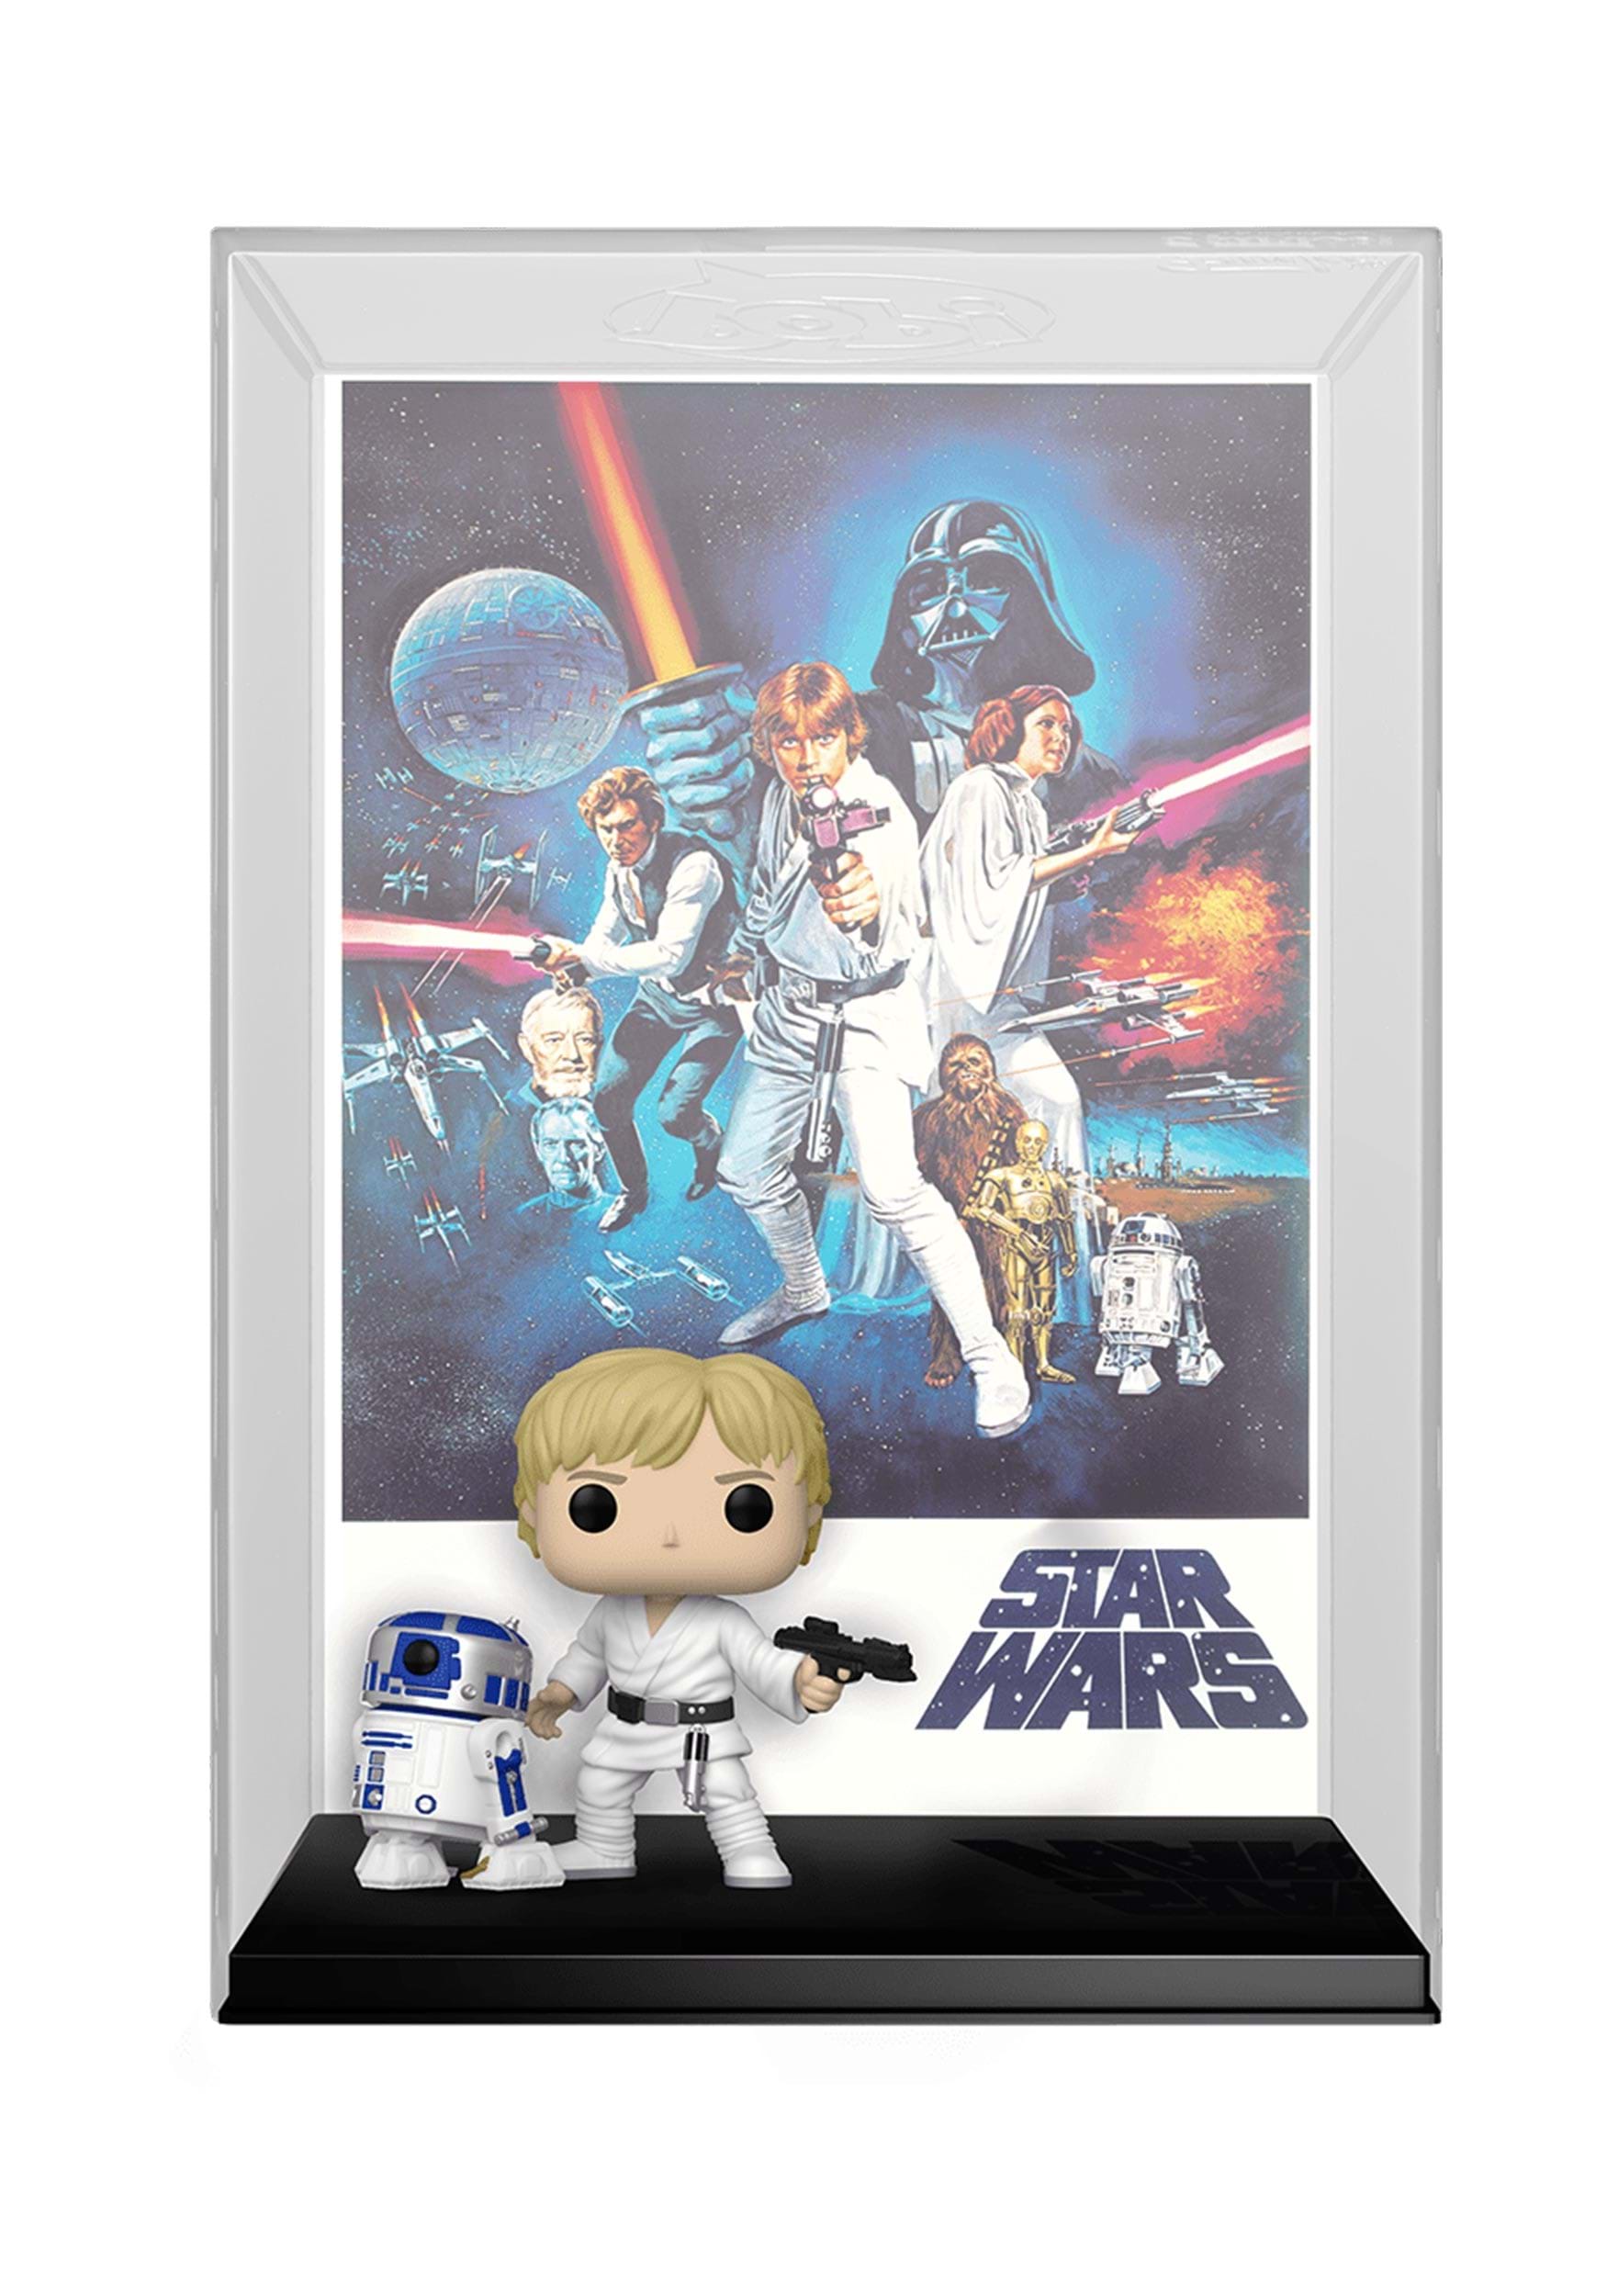 Star Wars: Episode IV - A New Hope POP! Movie Poster Figure with Case